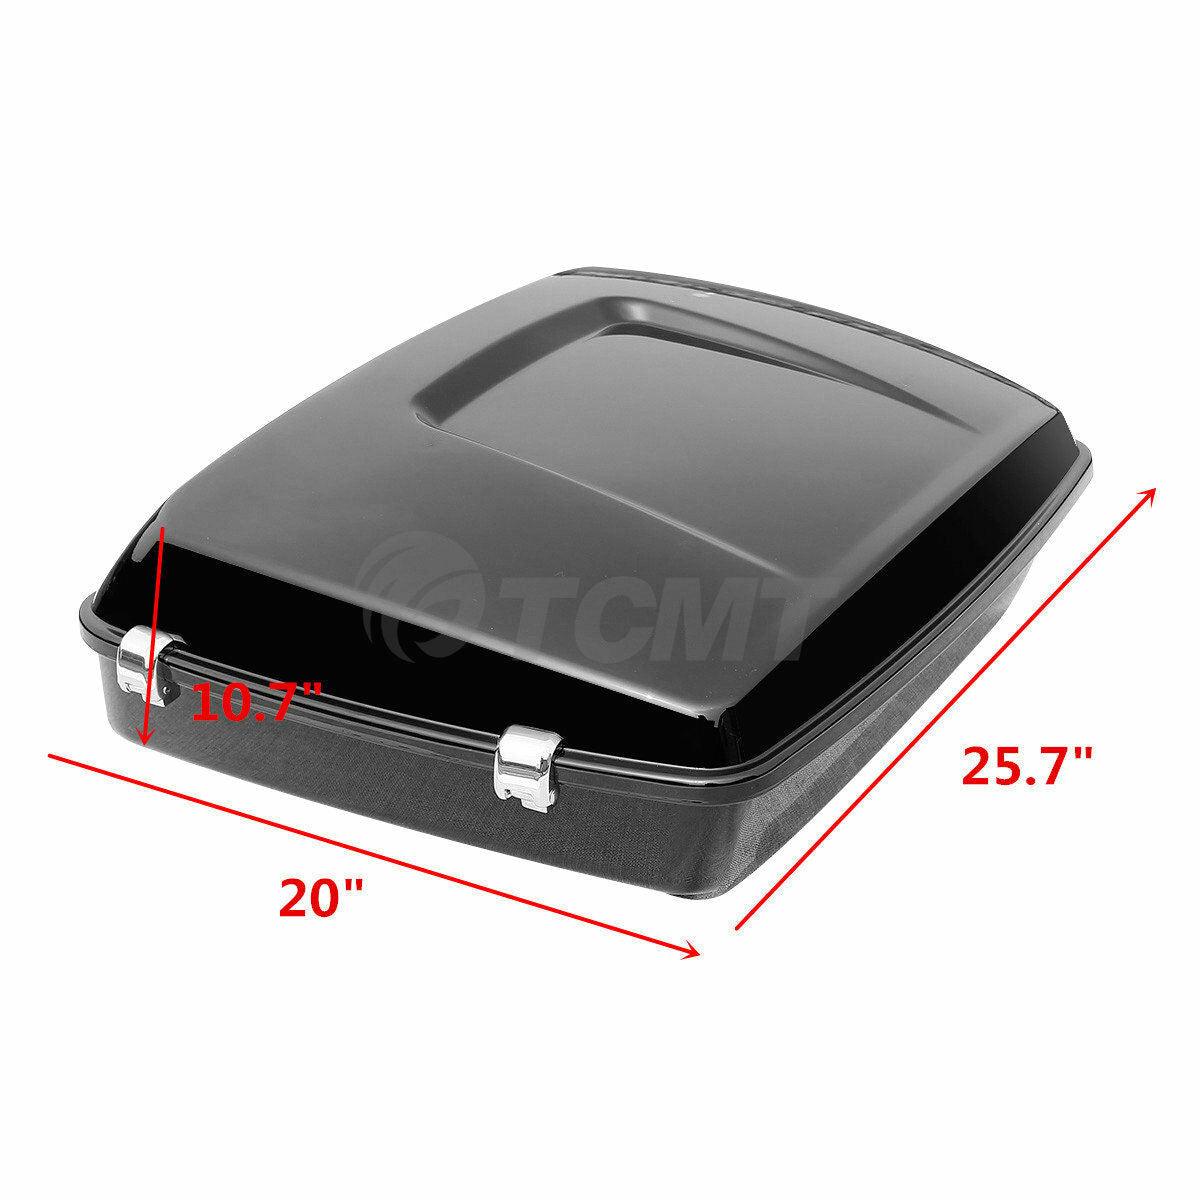 10.7" Chopped Trunk Pad Mount Top Rack Fit For Harley Tour Pak Fat Boy 2008-2016 - Moto Life Products